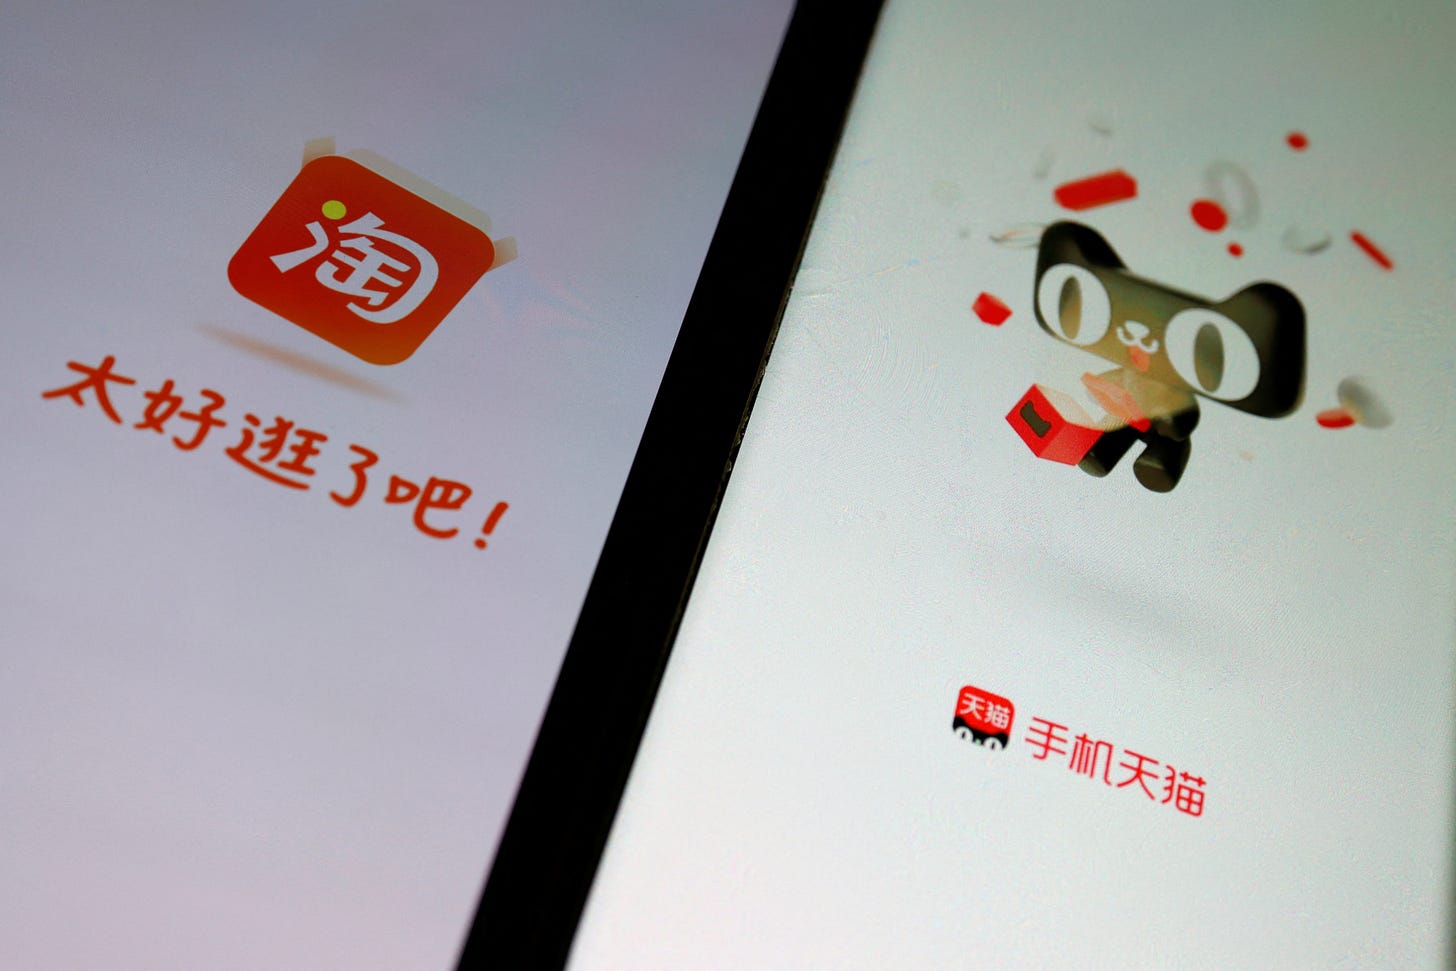 Facing gloomy China consumers, Alibaba's Taobao replaces Dec 12 shopping  spree with new event | Reuters